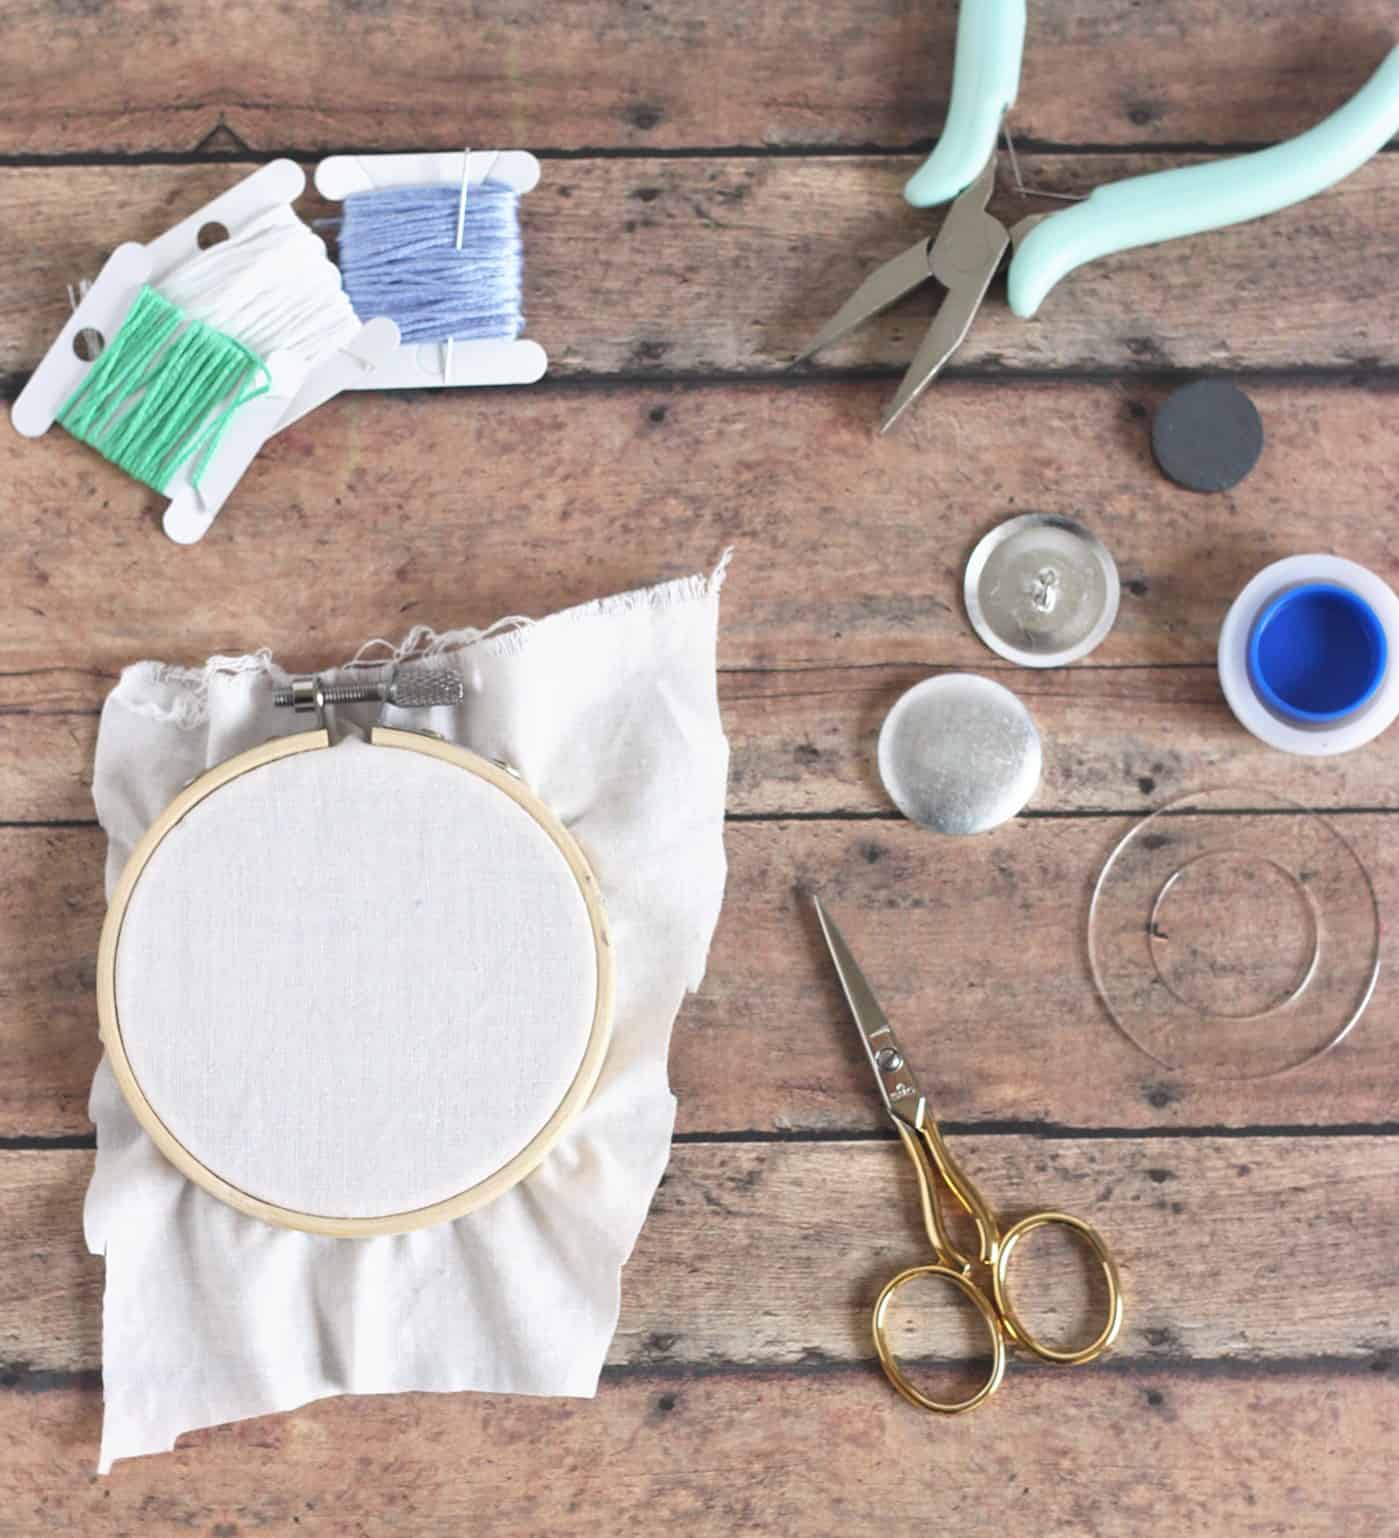 Embroidery thread, woven fabric in an embroidery hoop, jewelry pliers, and a button cover kit